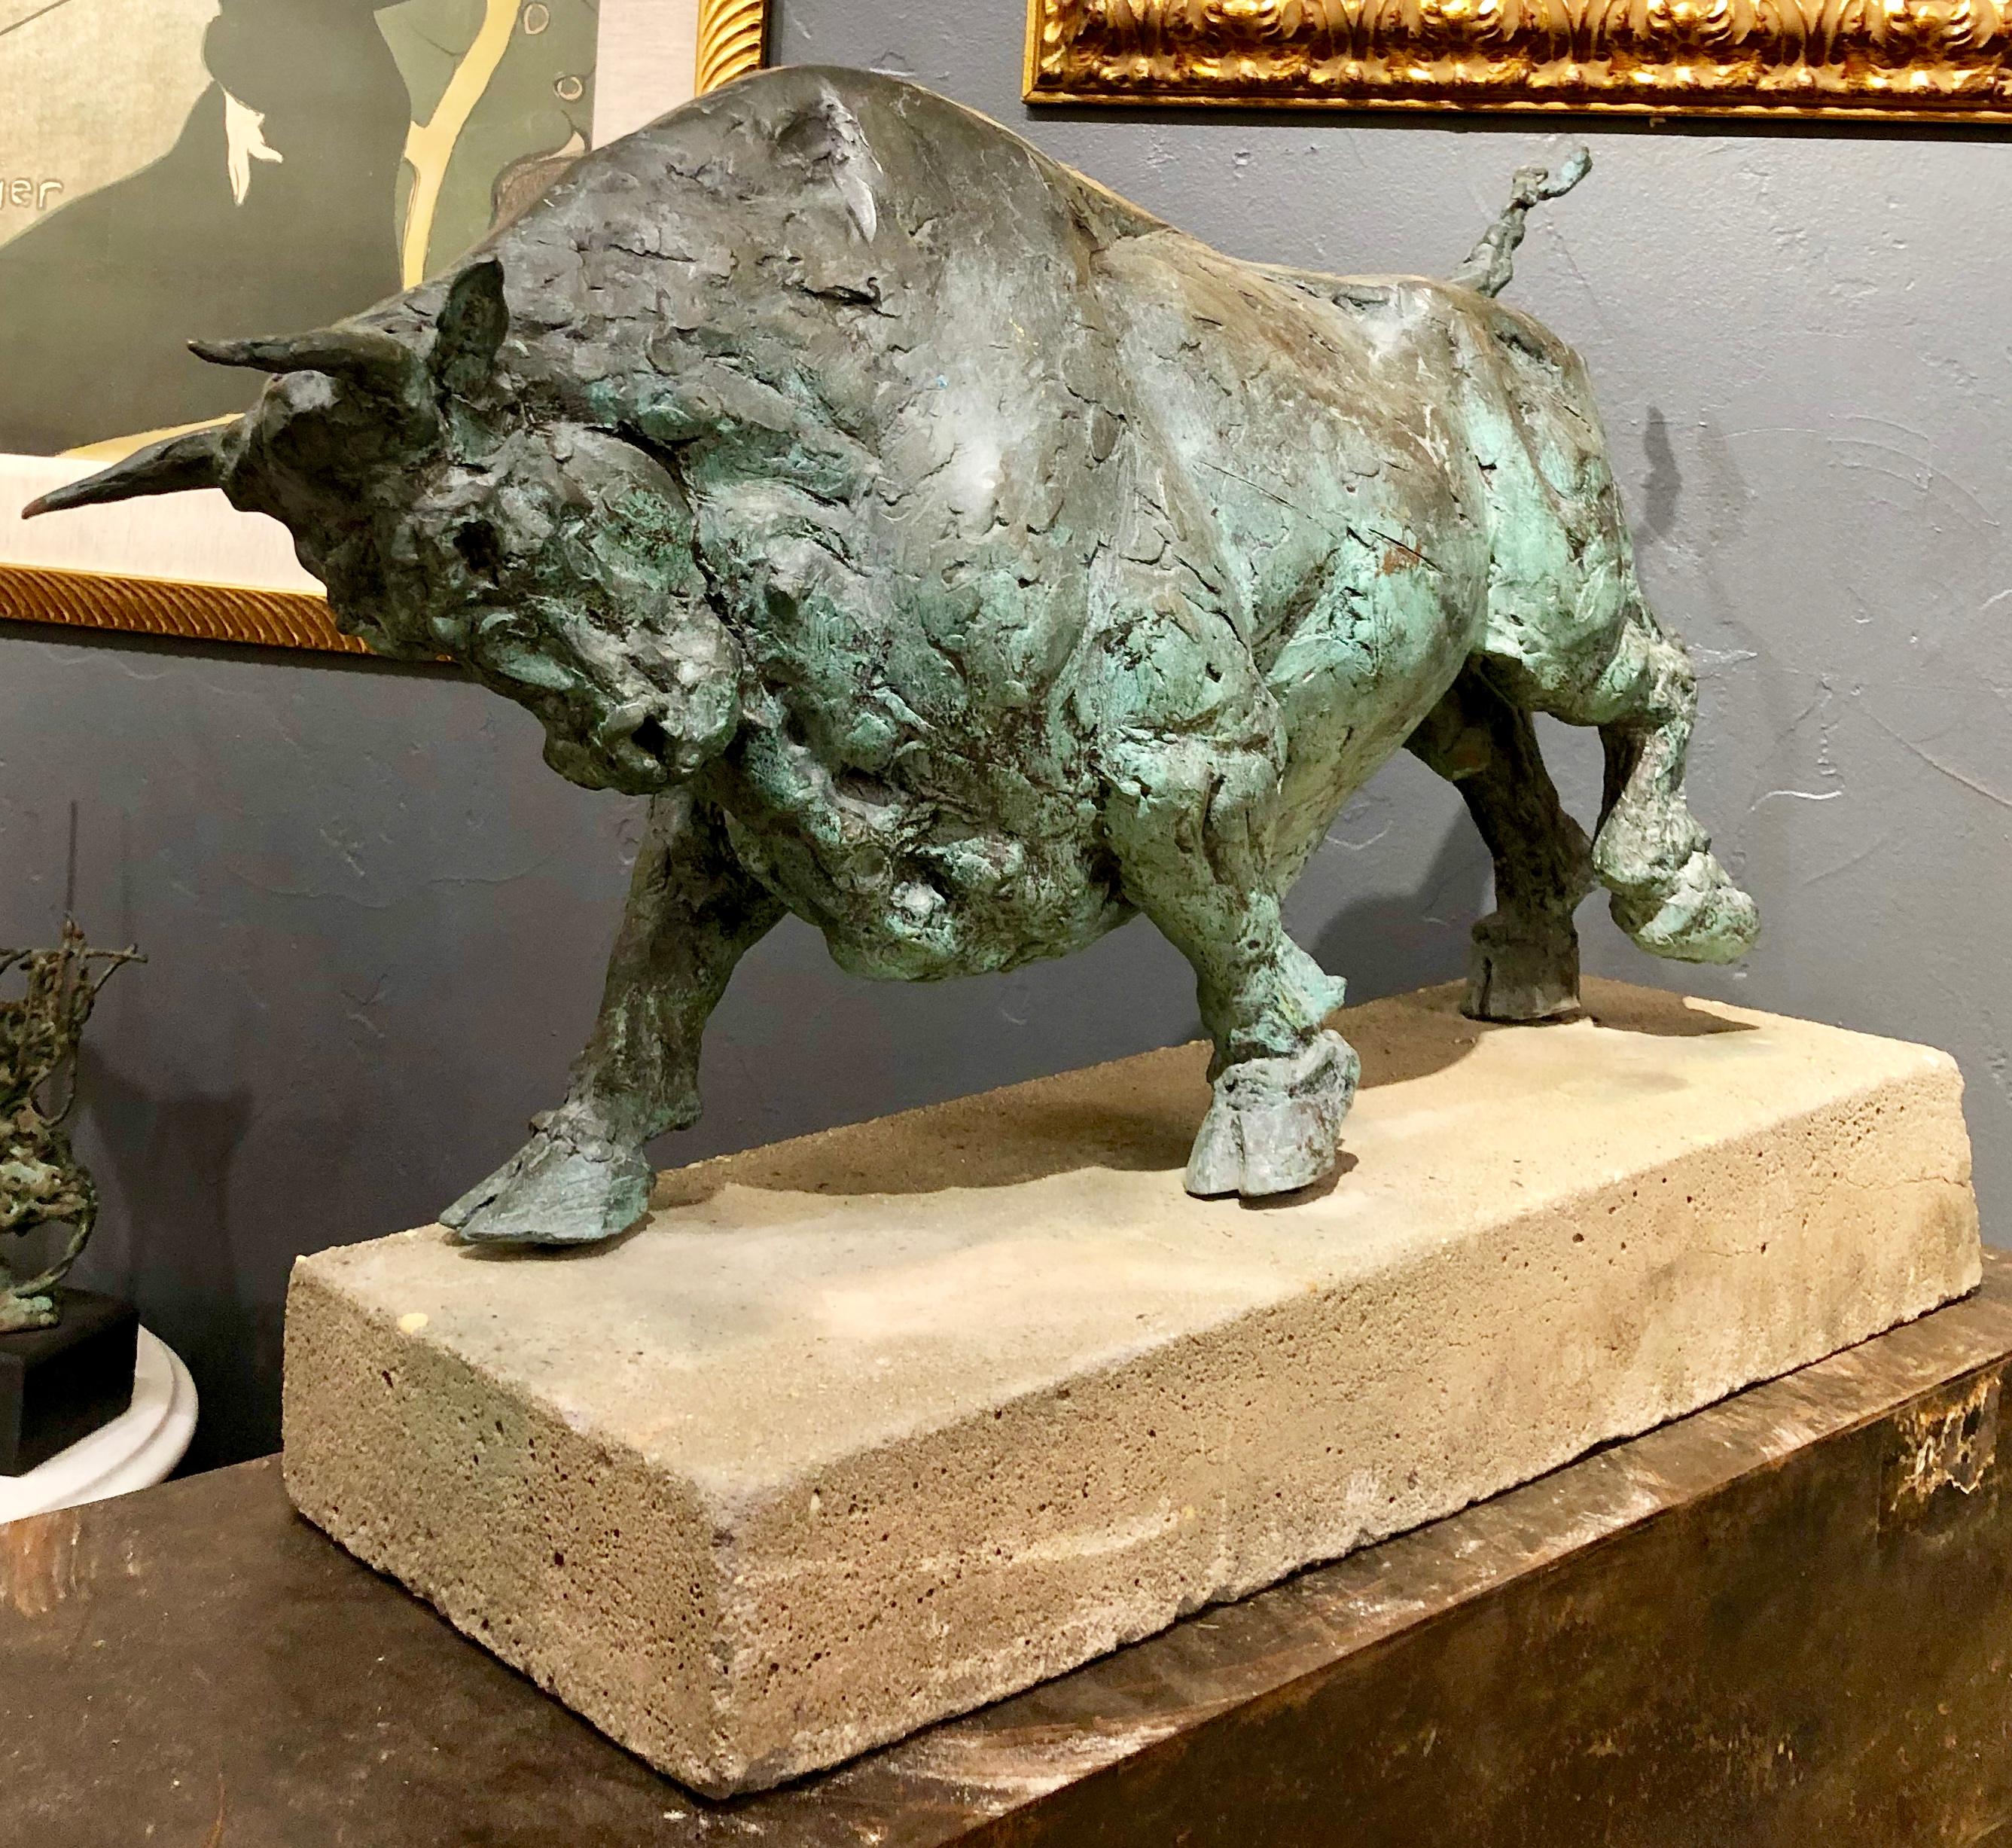 This bronze has an beautiful patina and looks to be an important work of art. No signature found, but it is substantial and very well executed. Most likely the original concrete base that has a slant to accentuate the charging of the bull. Age